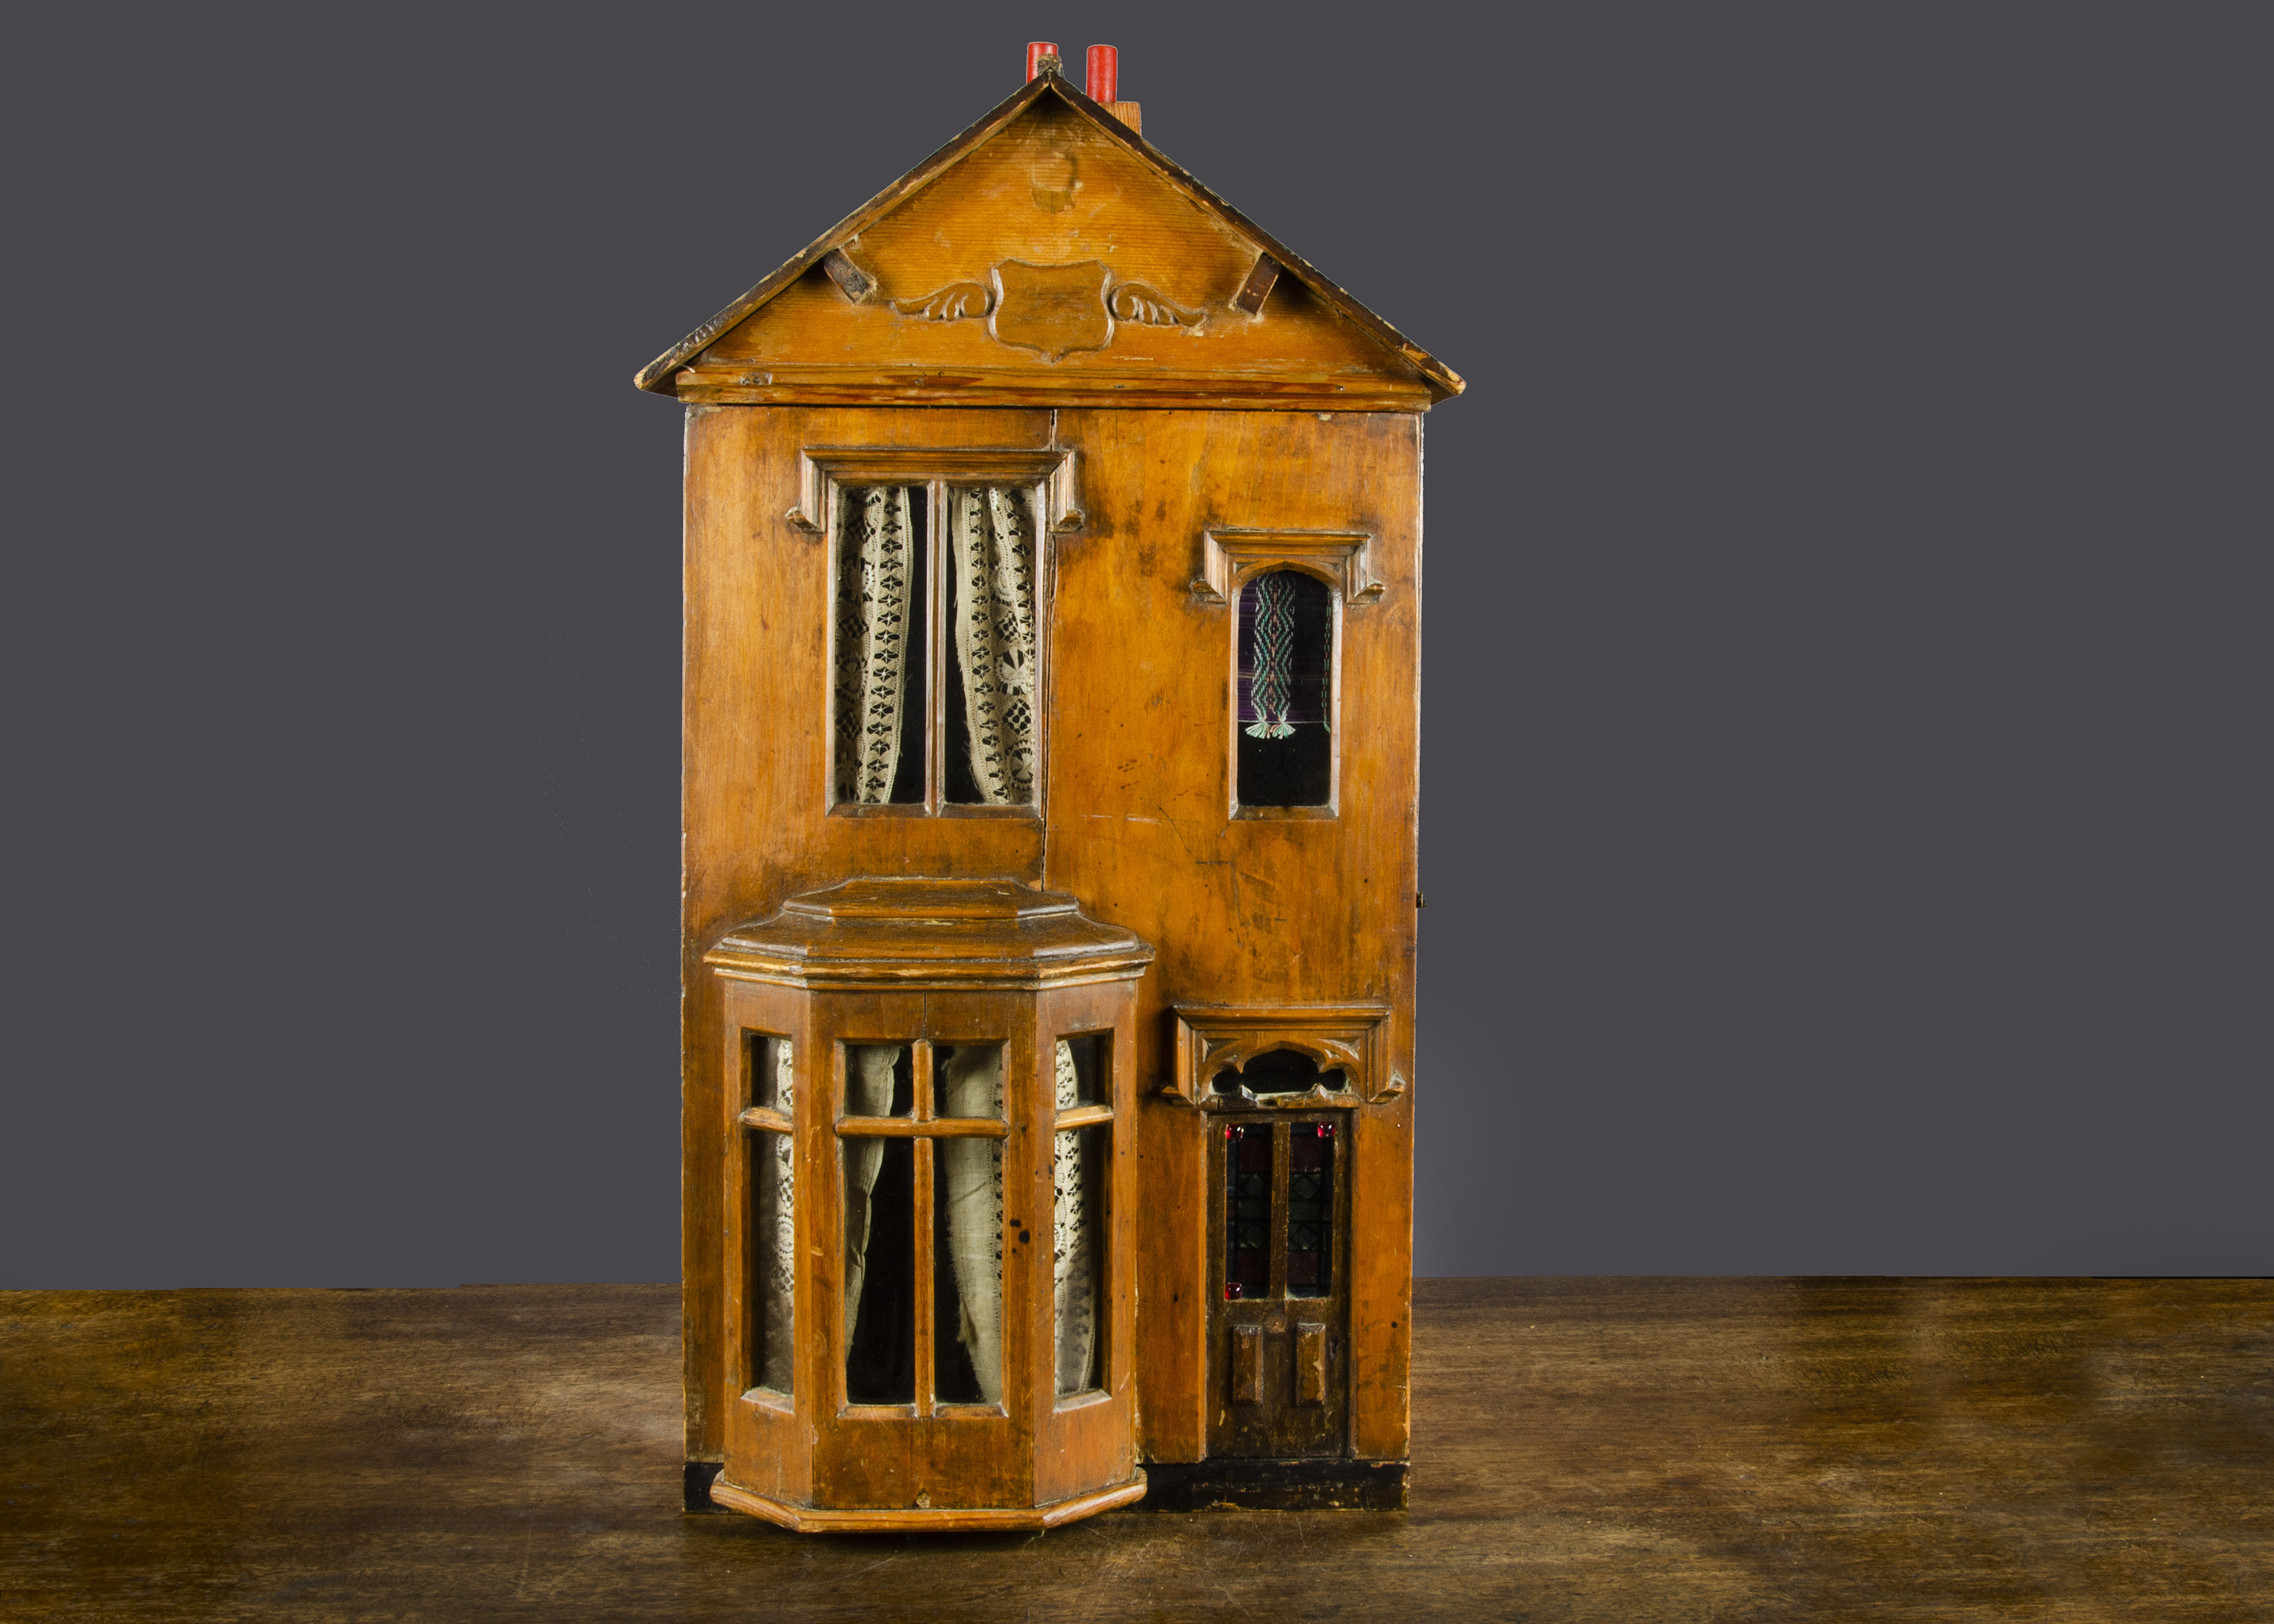 A small late 19th Century English wooden dolls’ house, pine construction with bay window, dummy